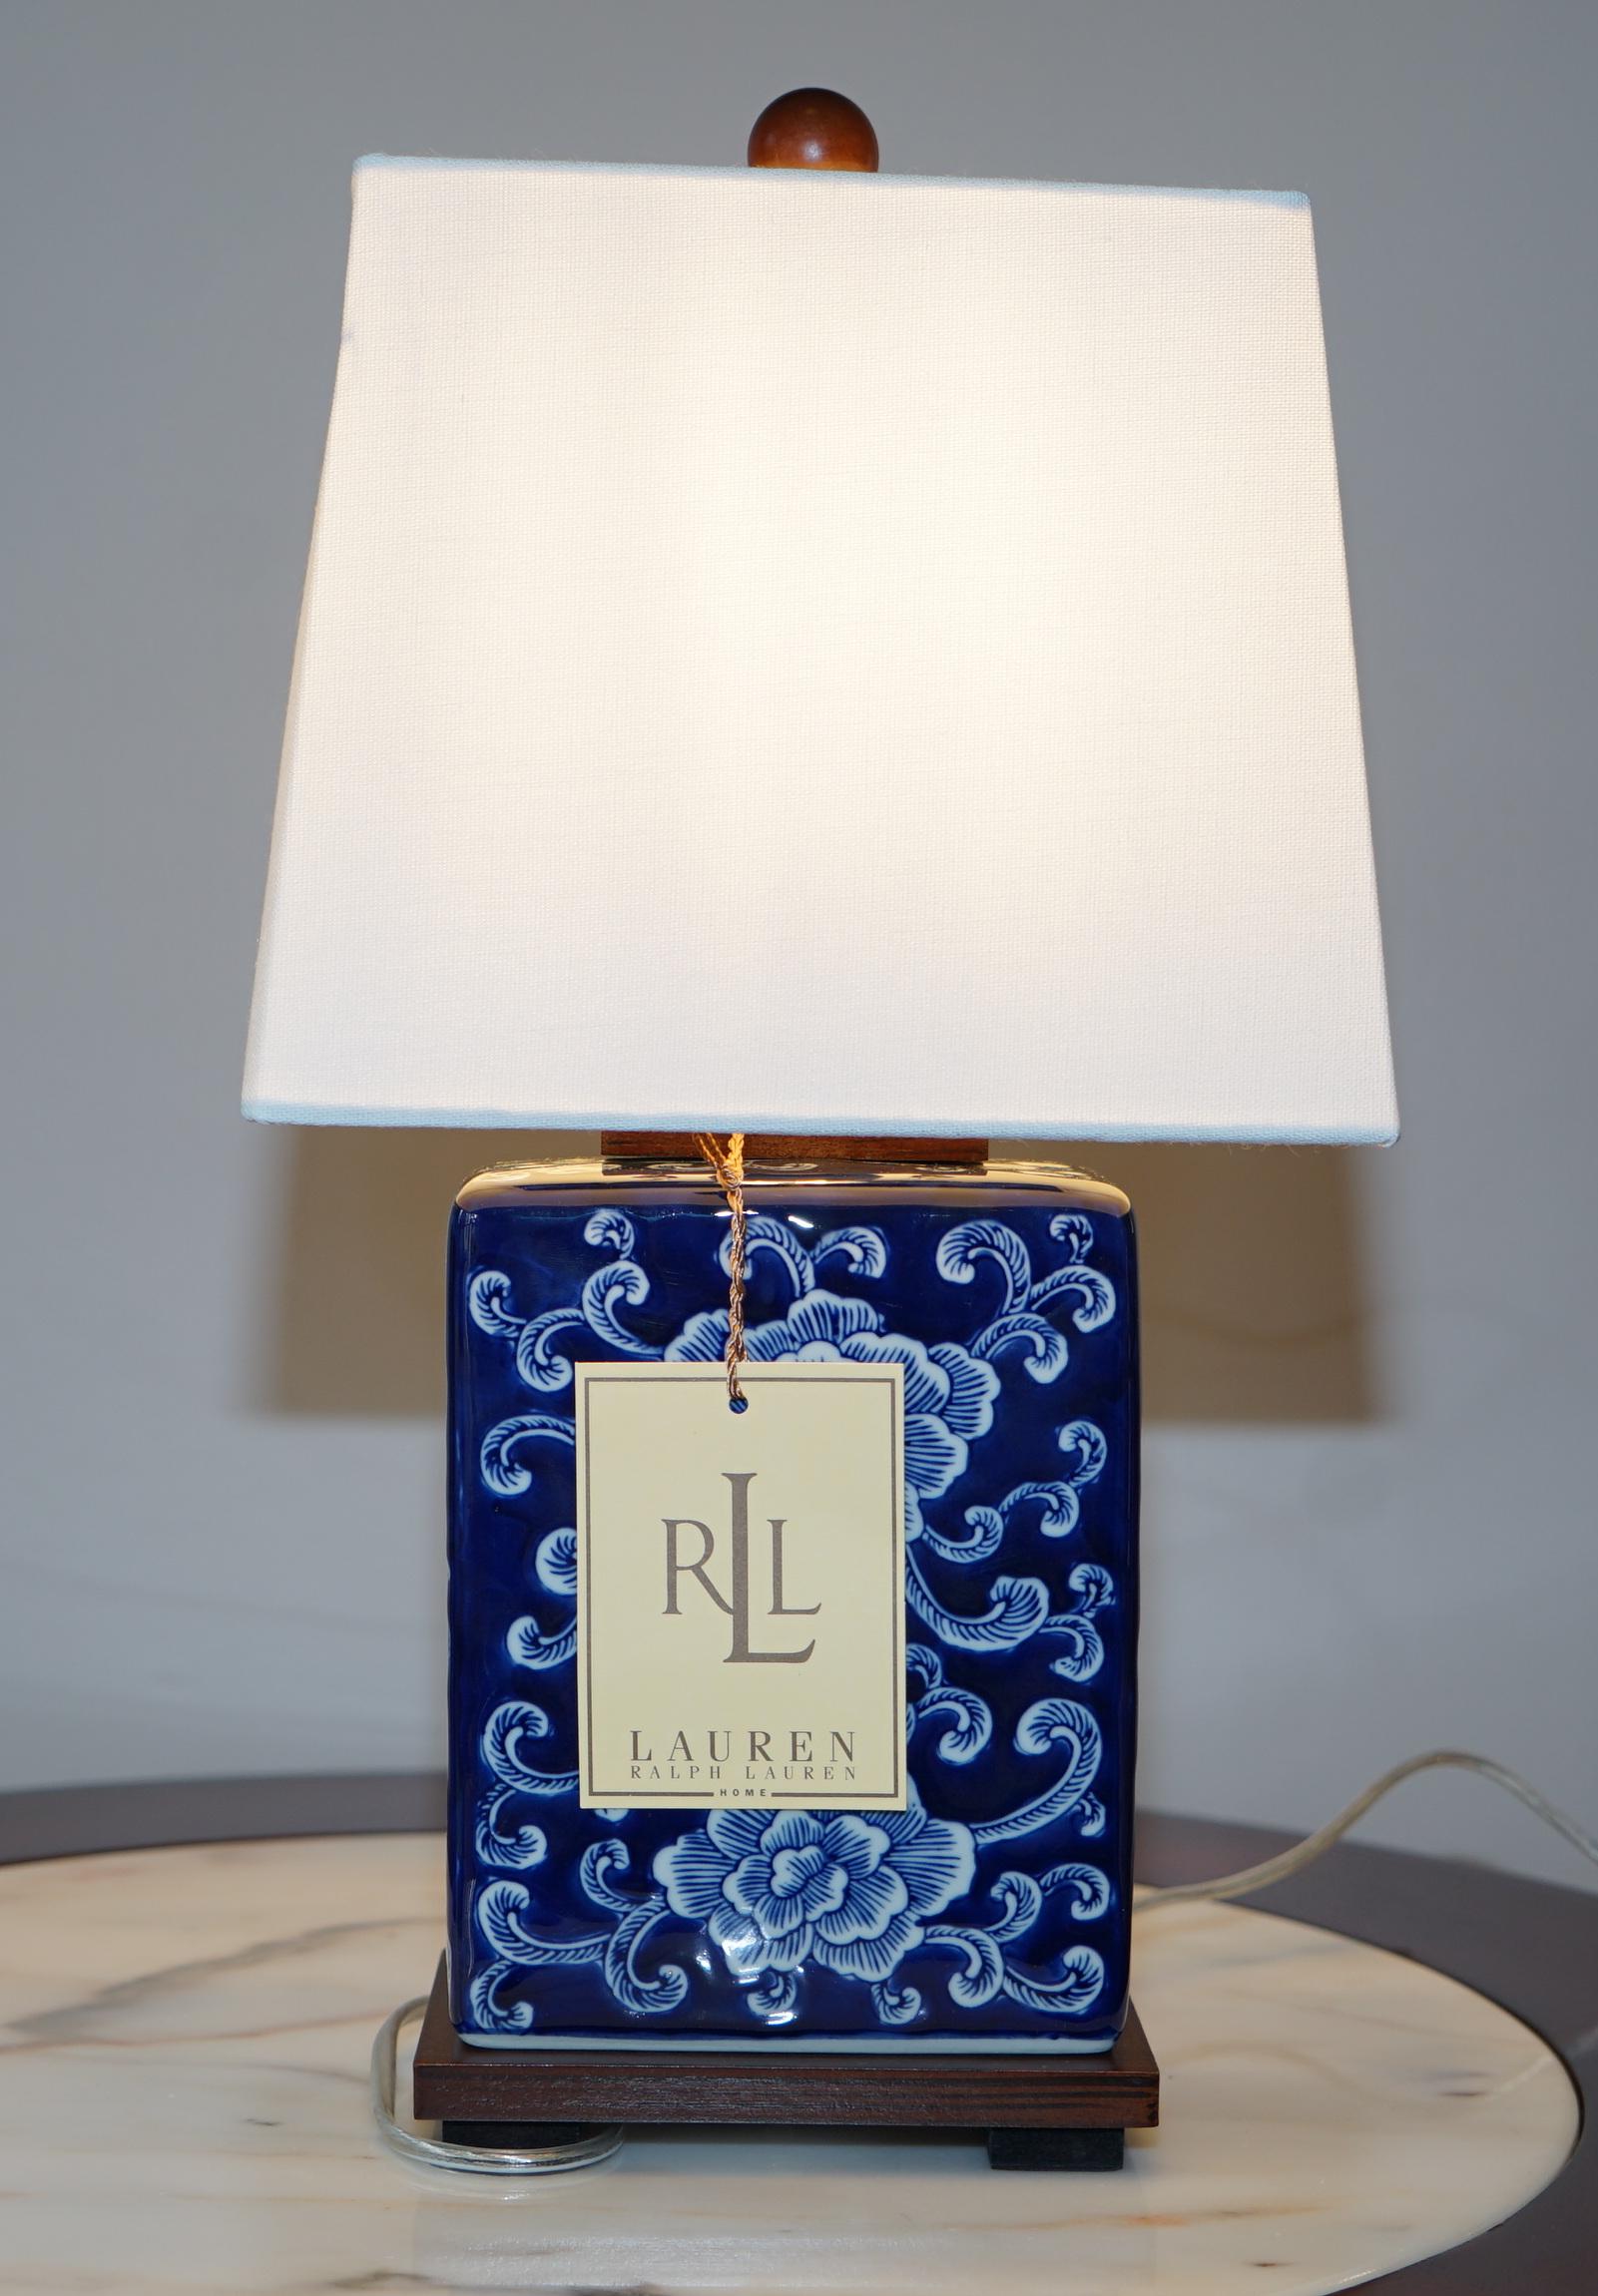 20th Century Pair of Ralph Lauren Blue Chinese Porcelain Table Lamps Stunning Chinese Design